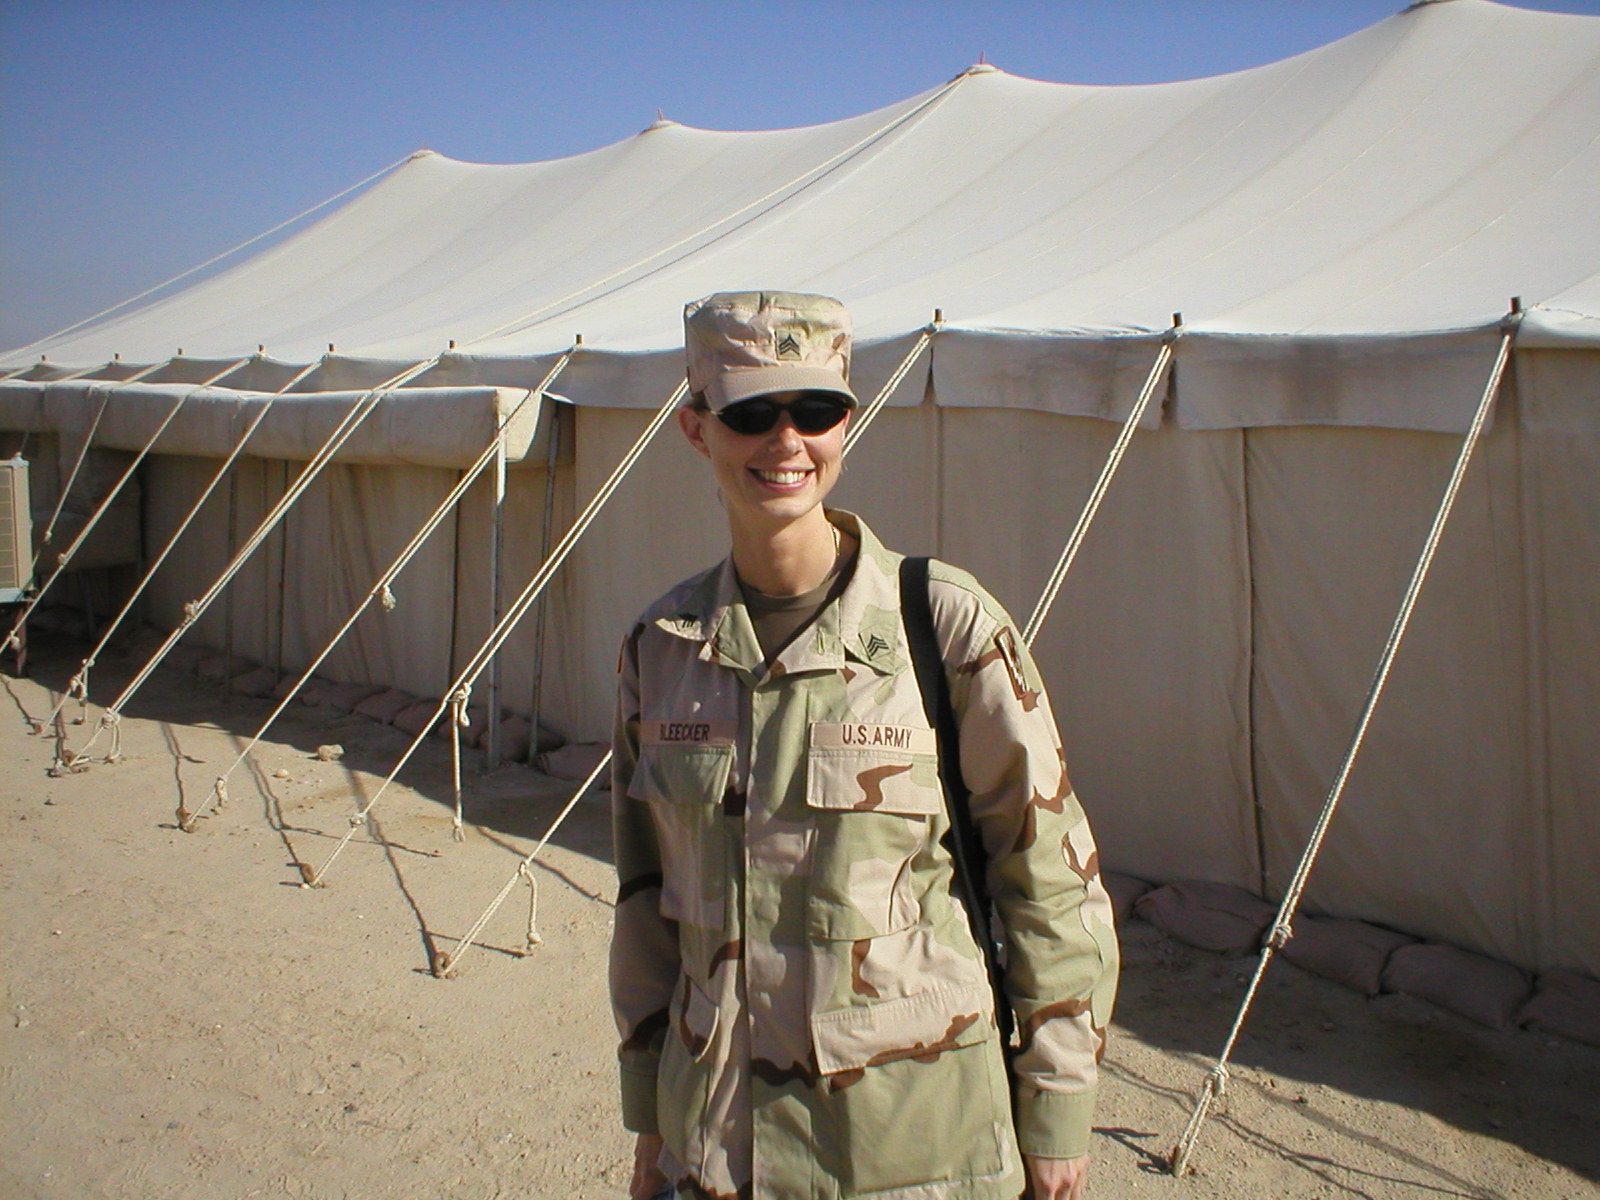 This photo shows a woman in military uniform in front of a tent.